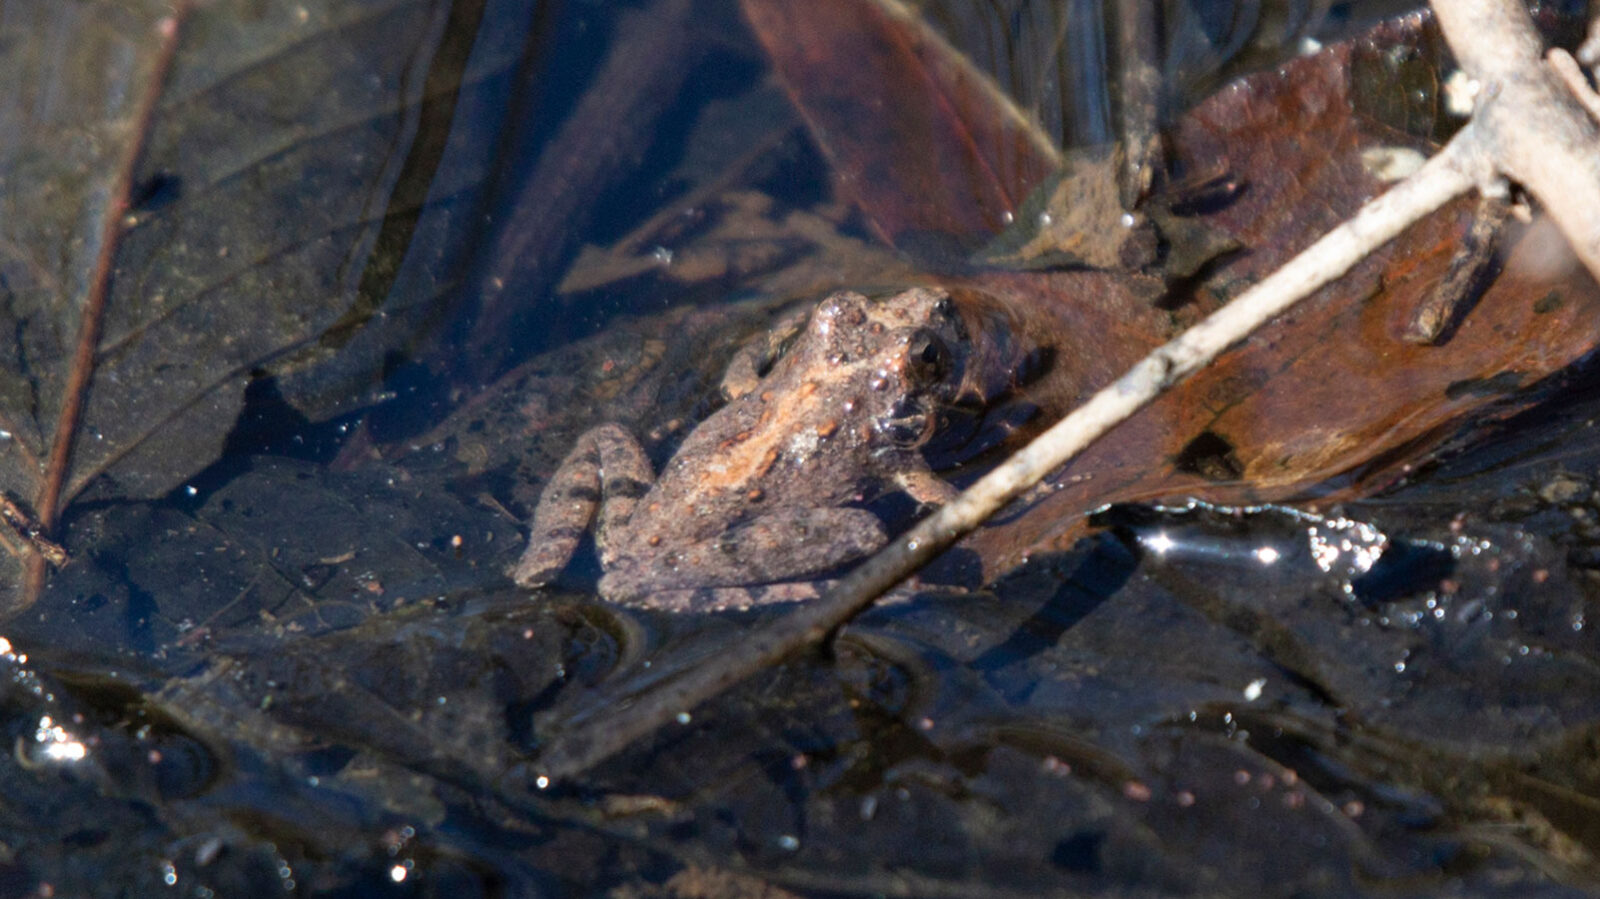 North Louisiana Amphibians: Northern cricket frog in shallow, stagnant water